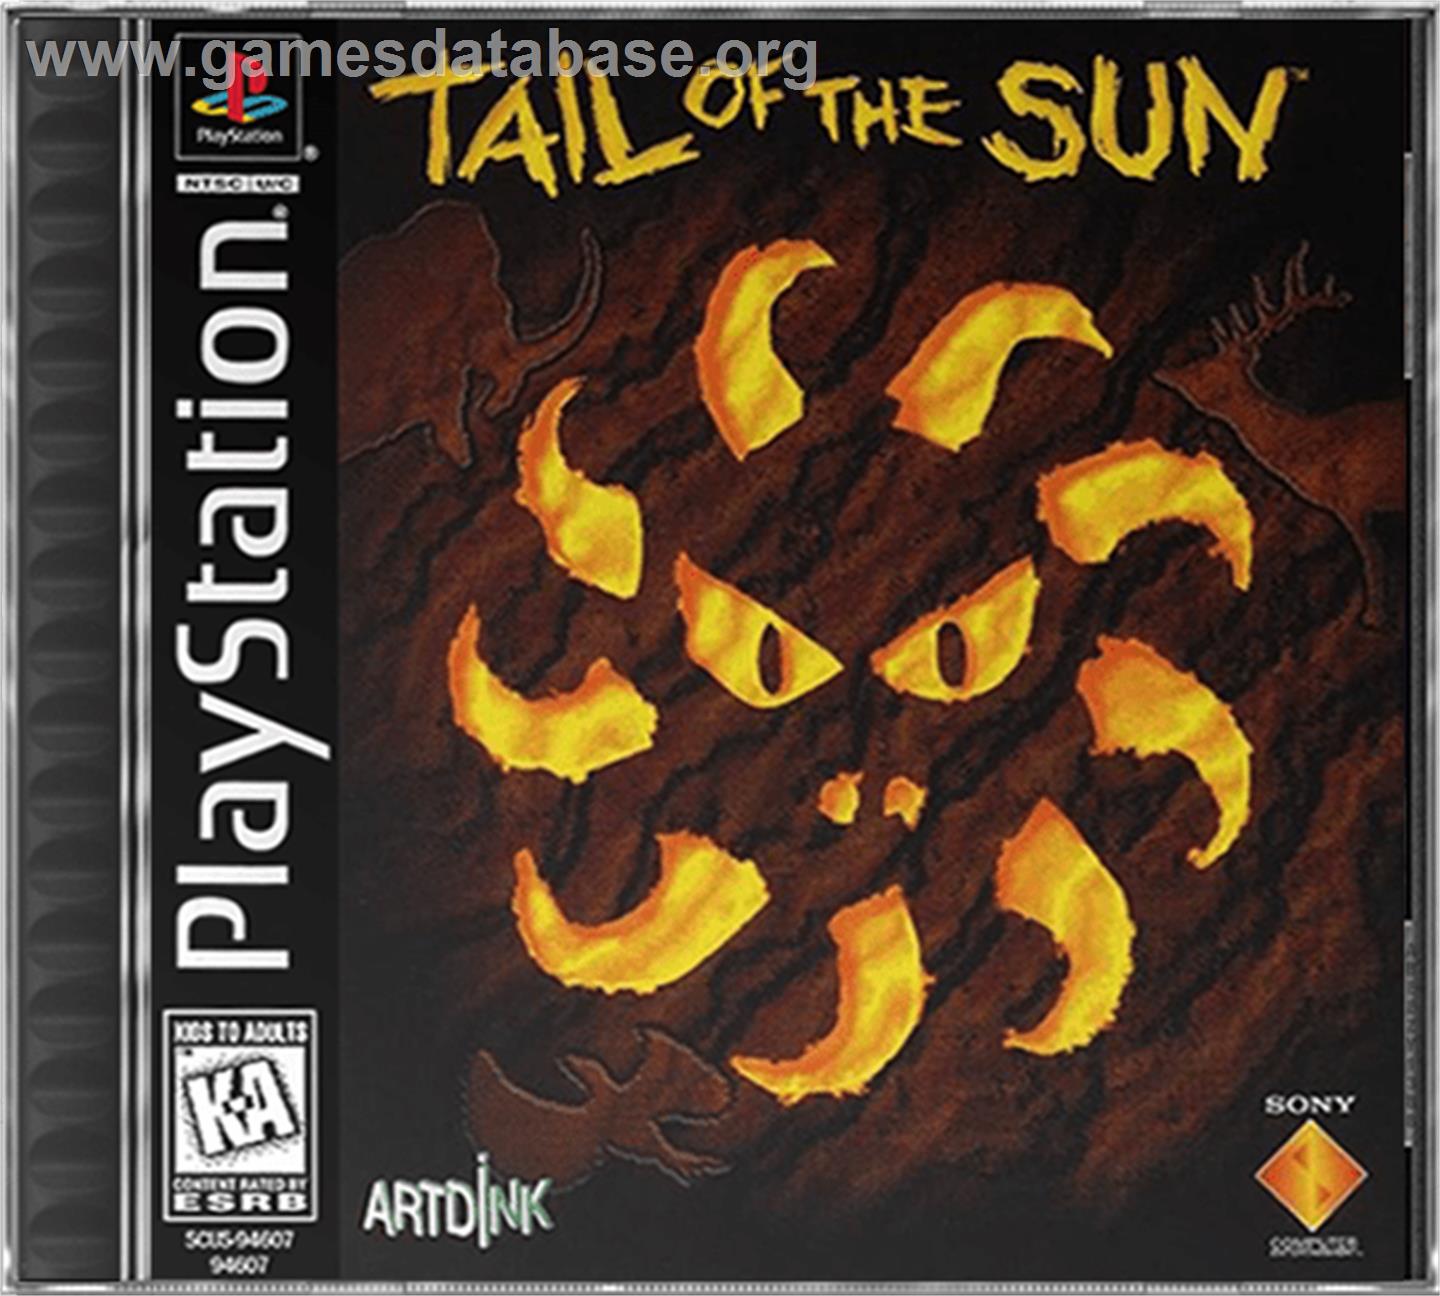 Tail of the Sun - Sony Playstation - Artwork - Box